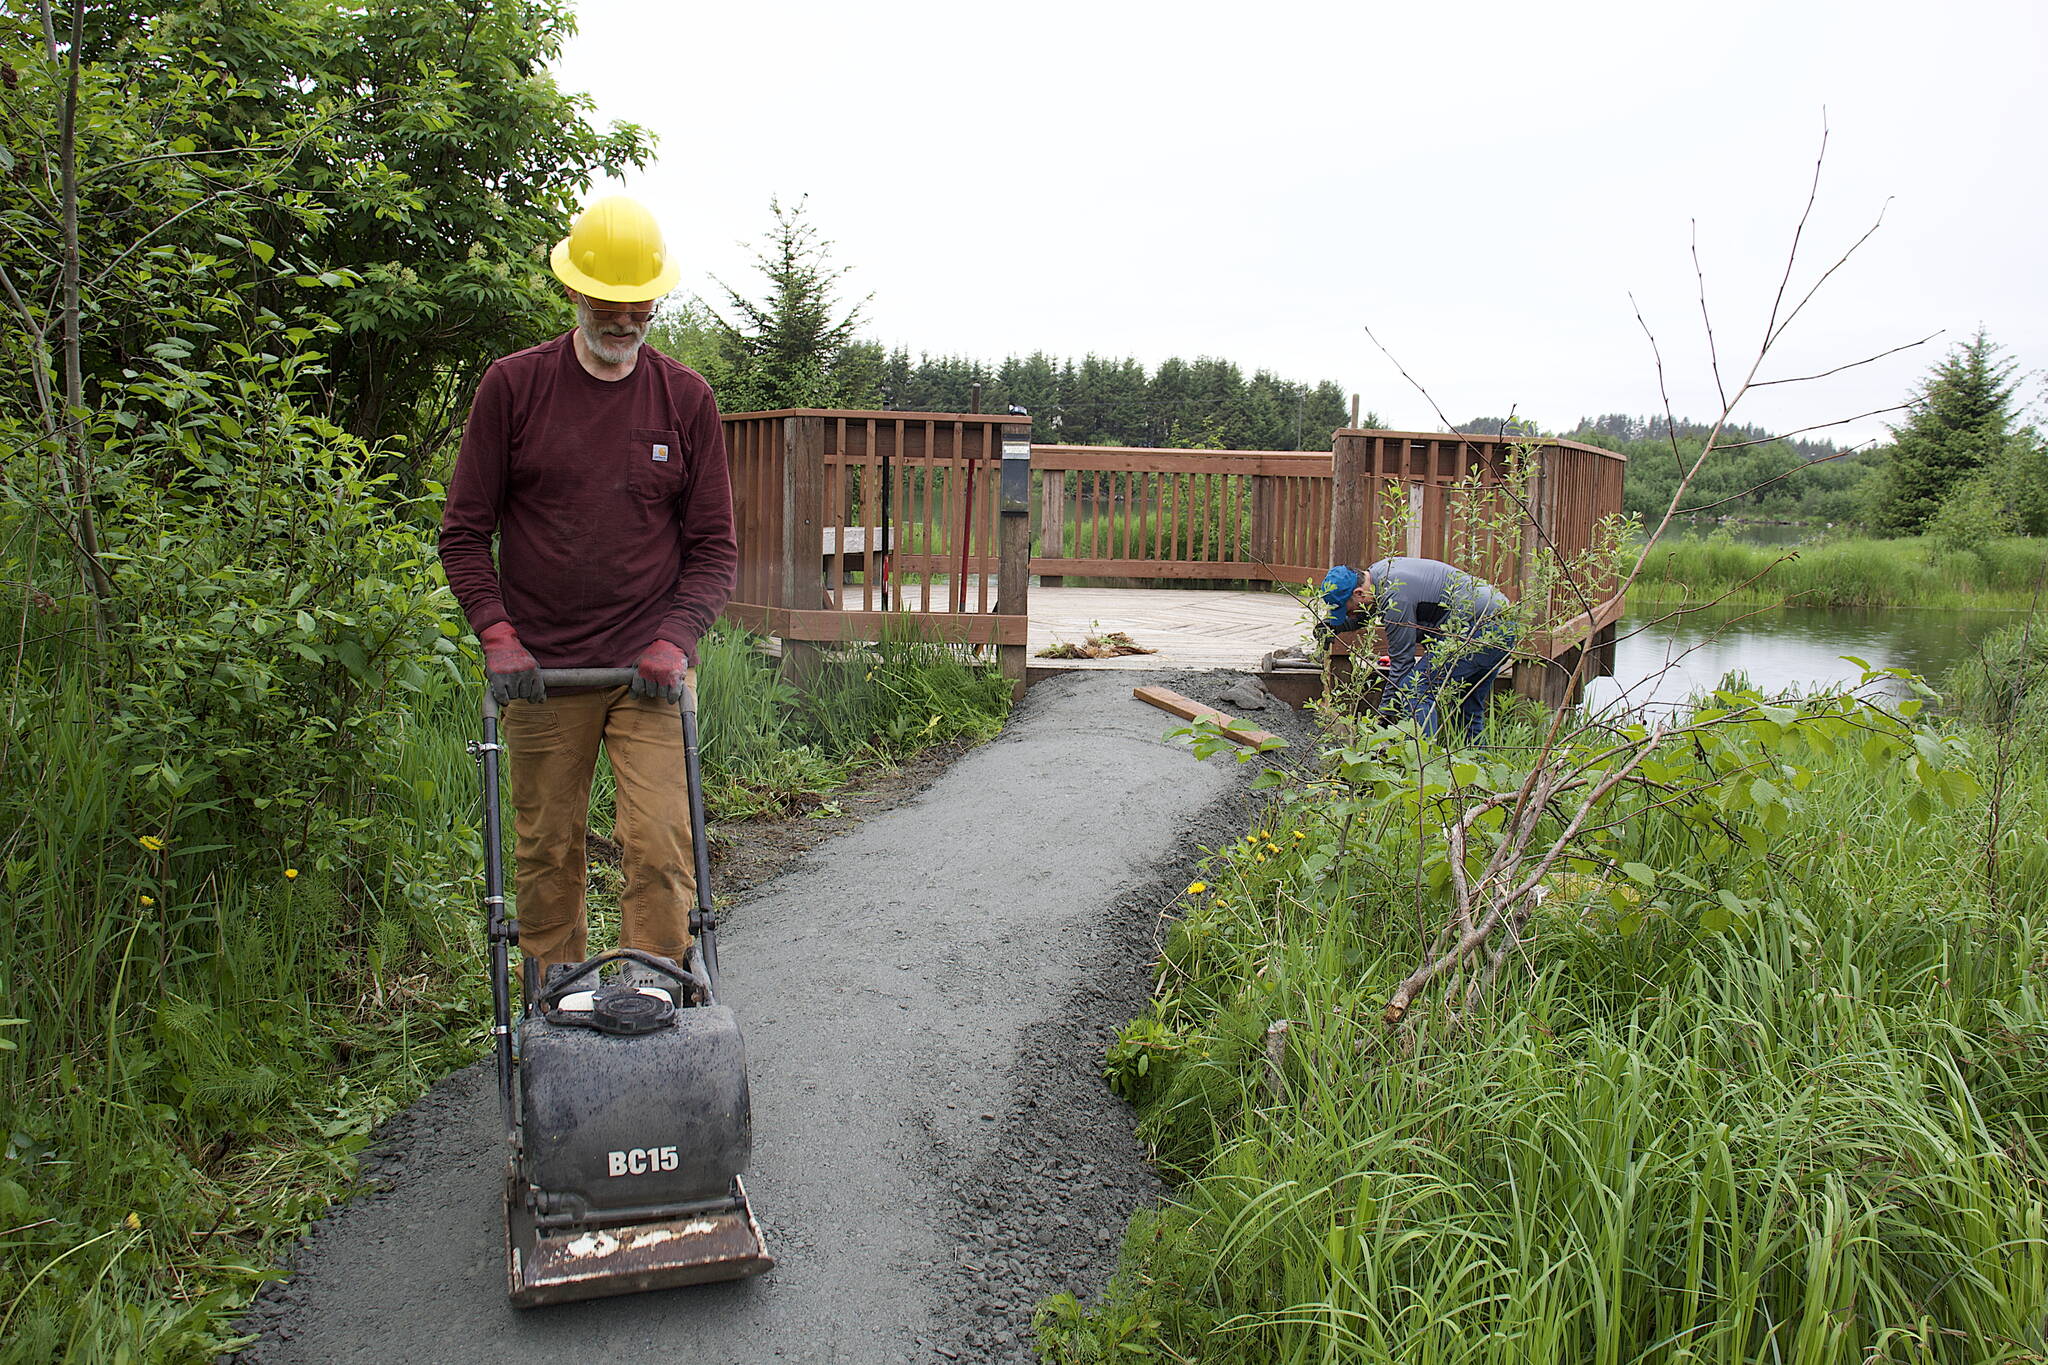 Chris Meade, a board member of Trail Mix and Juneau resident since 1991, uses a vibrating plate compactor to compress gravel leading to a viewing platform along the Kingfisher Pond Loop Trail on Saturday. (Mark Sabatini / Juneau Empire)